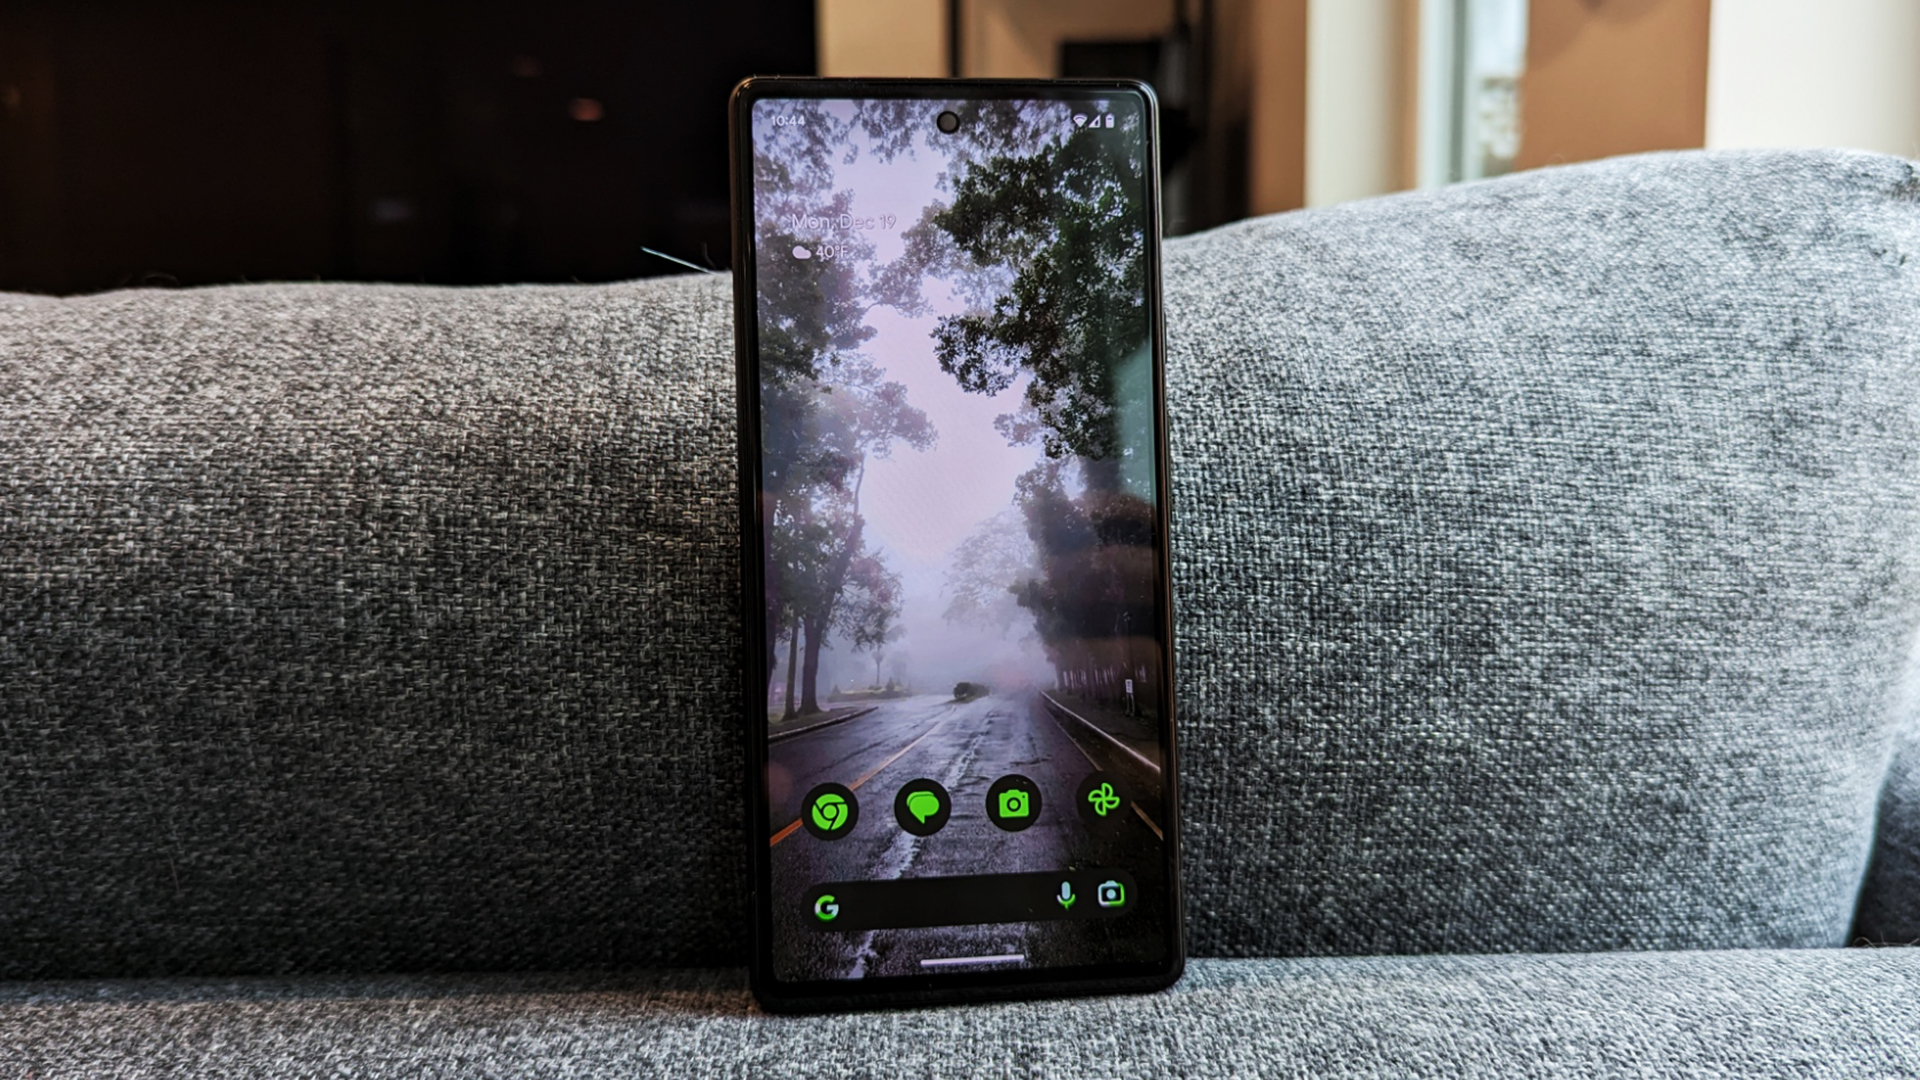 Wallpaper Wednesday: Android wallpapers 2022-12-21